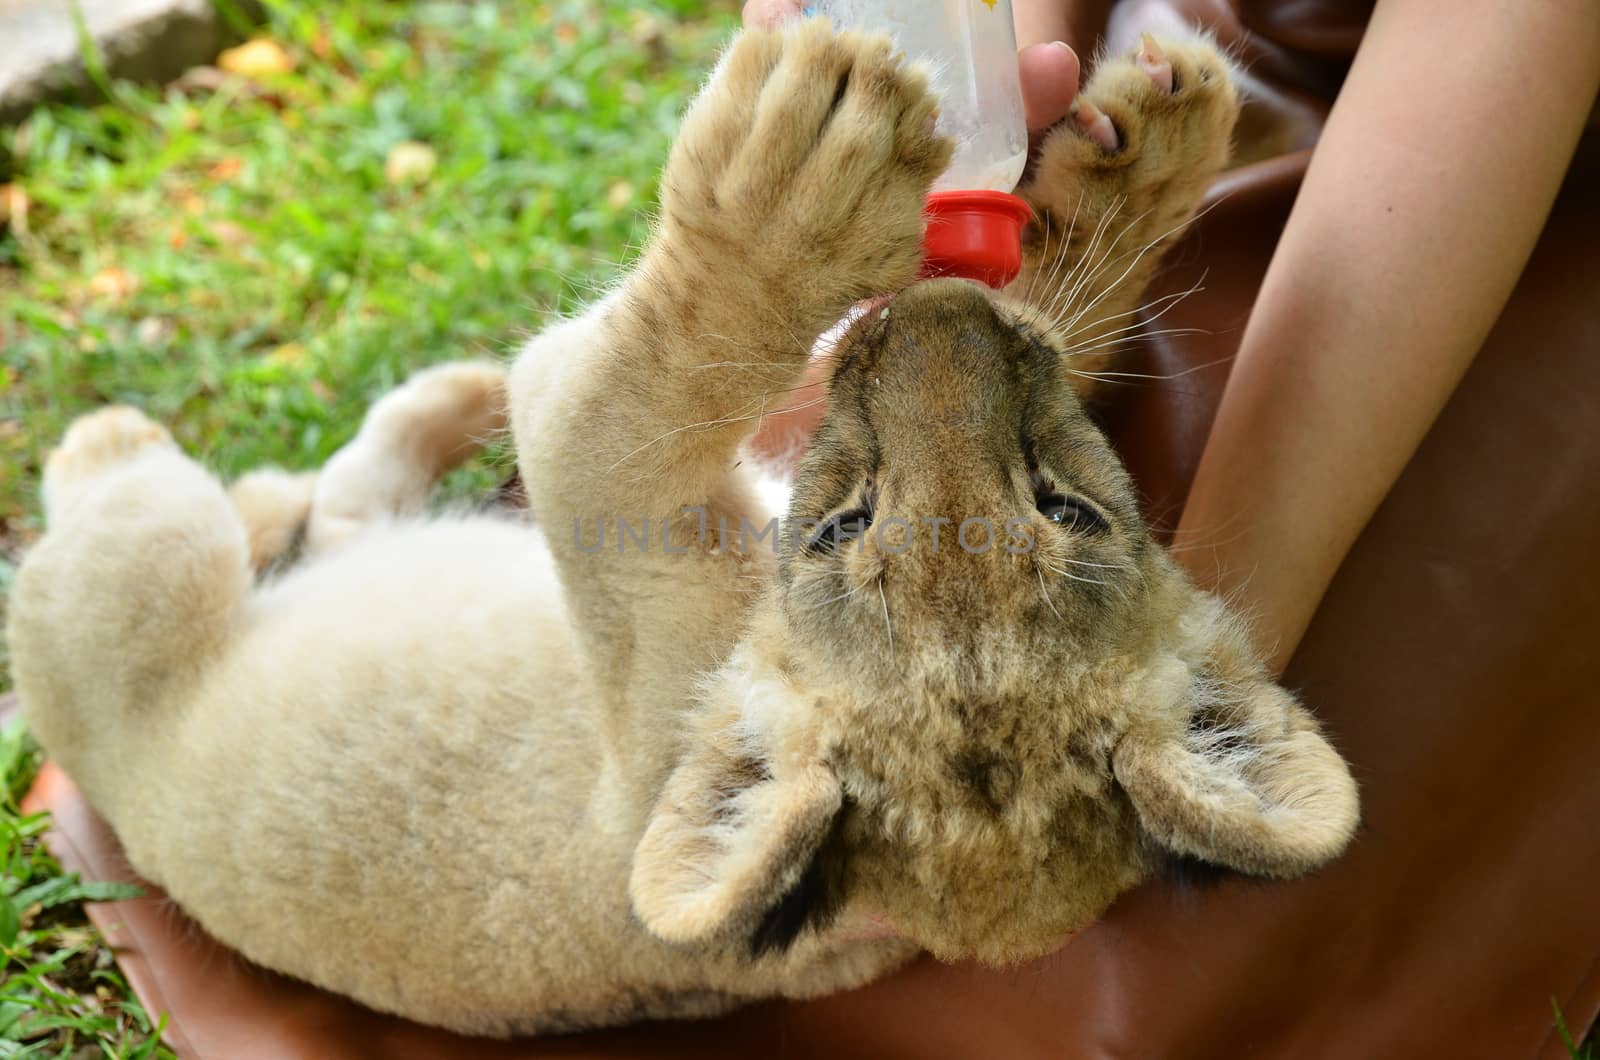 zookeeper feeding baby lion by anankkml